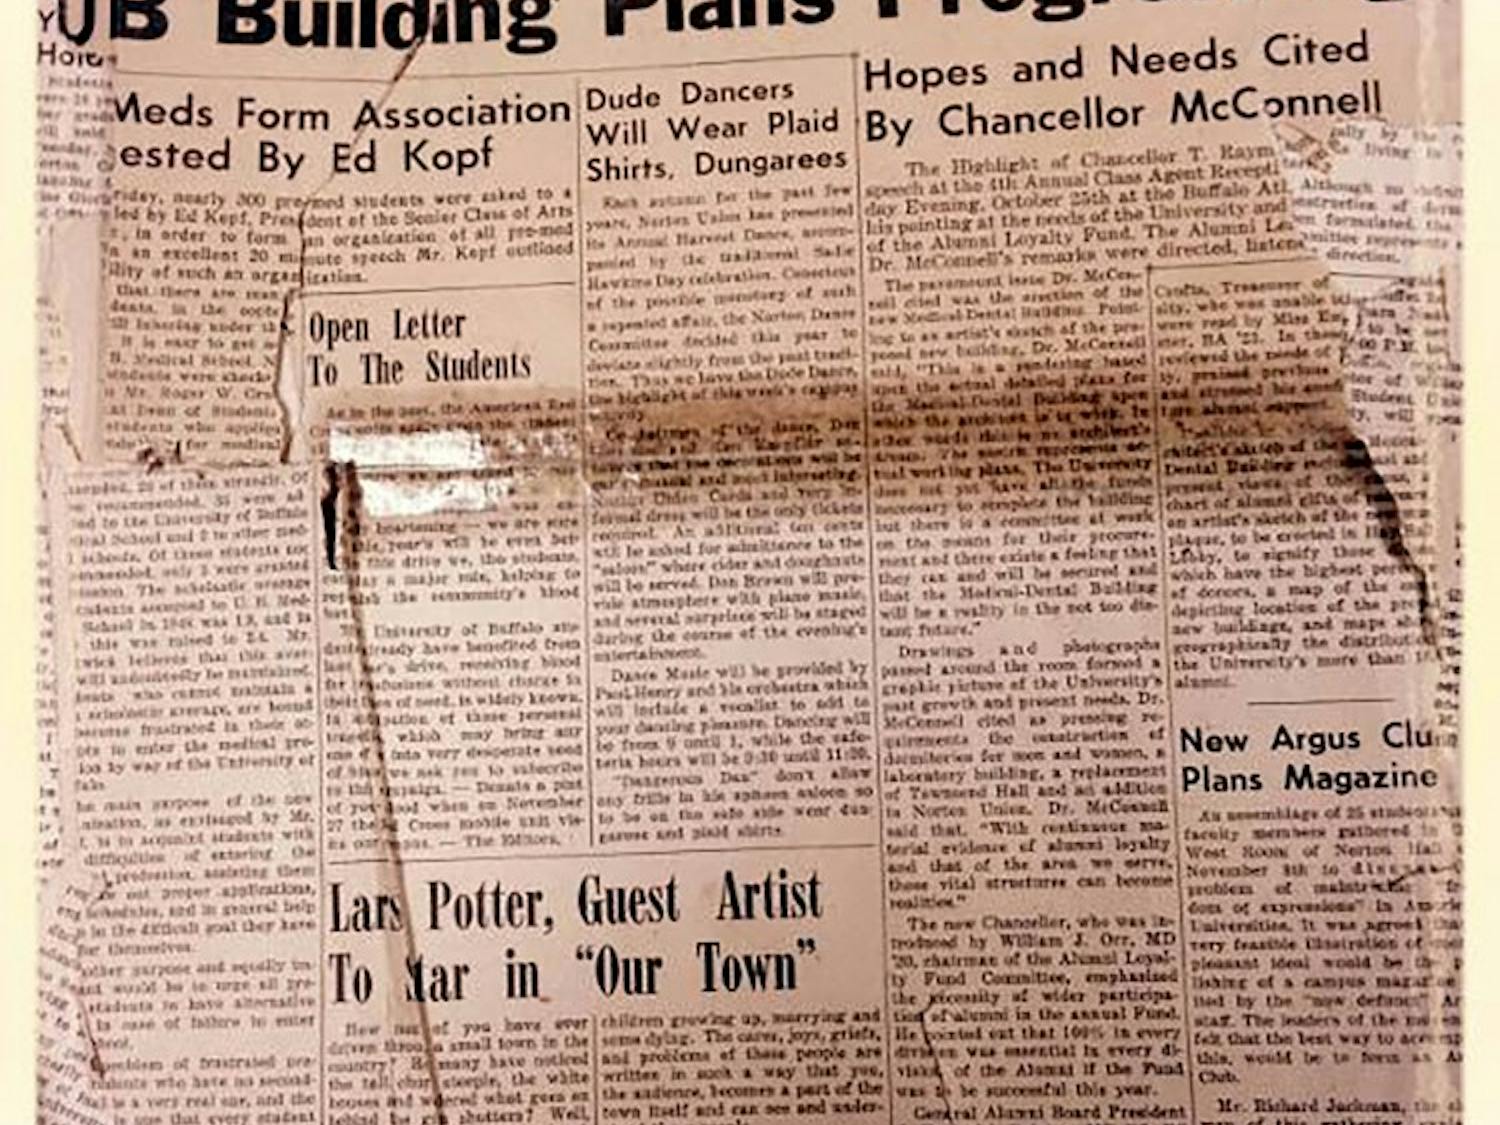 The Spectrum, UB's only independent student newspaper was born on November 17, 1950. The front page above comes from our first edition.